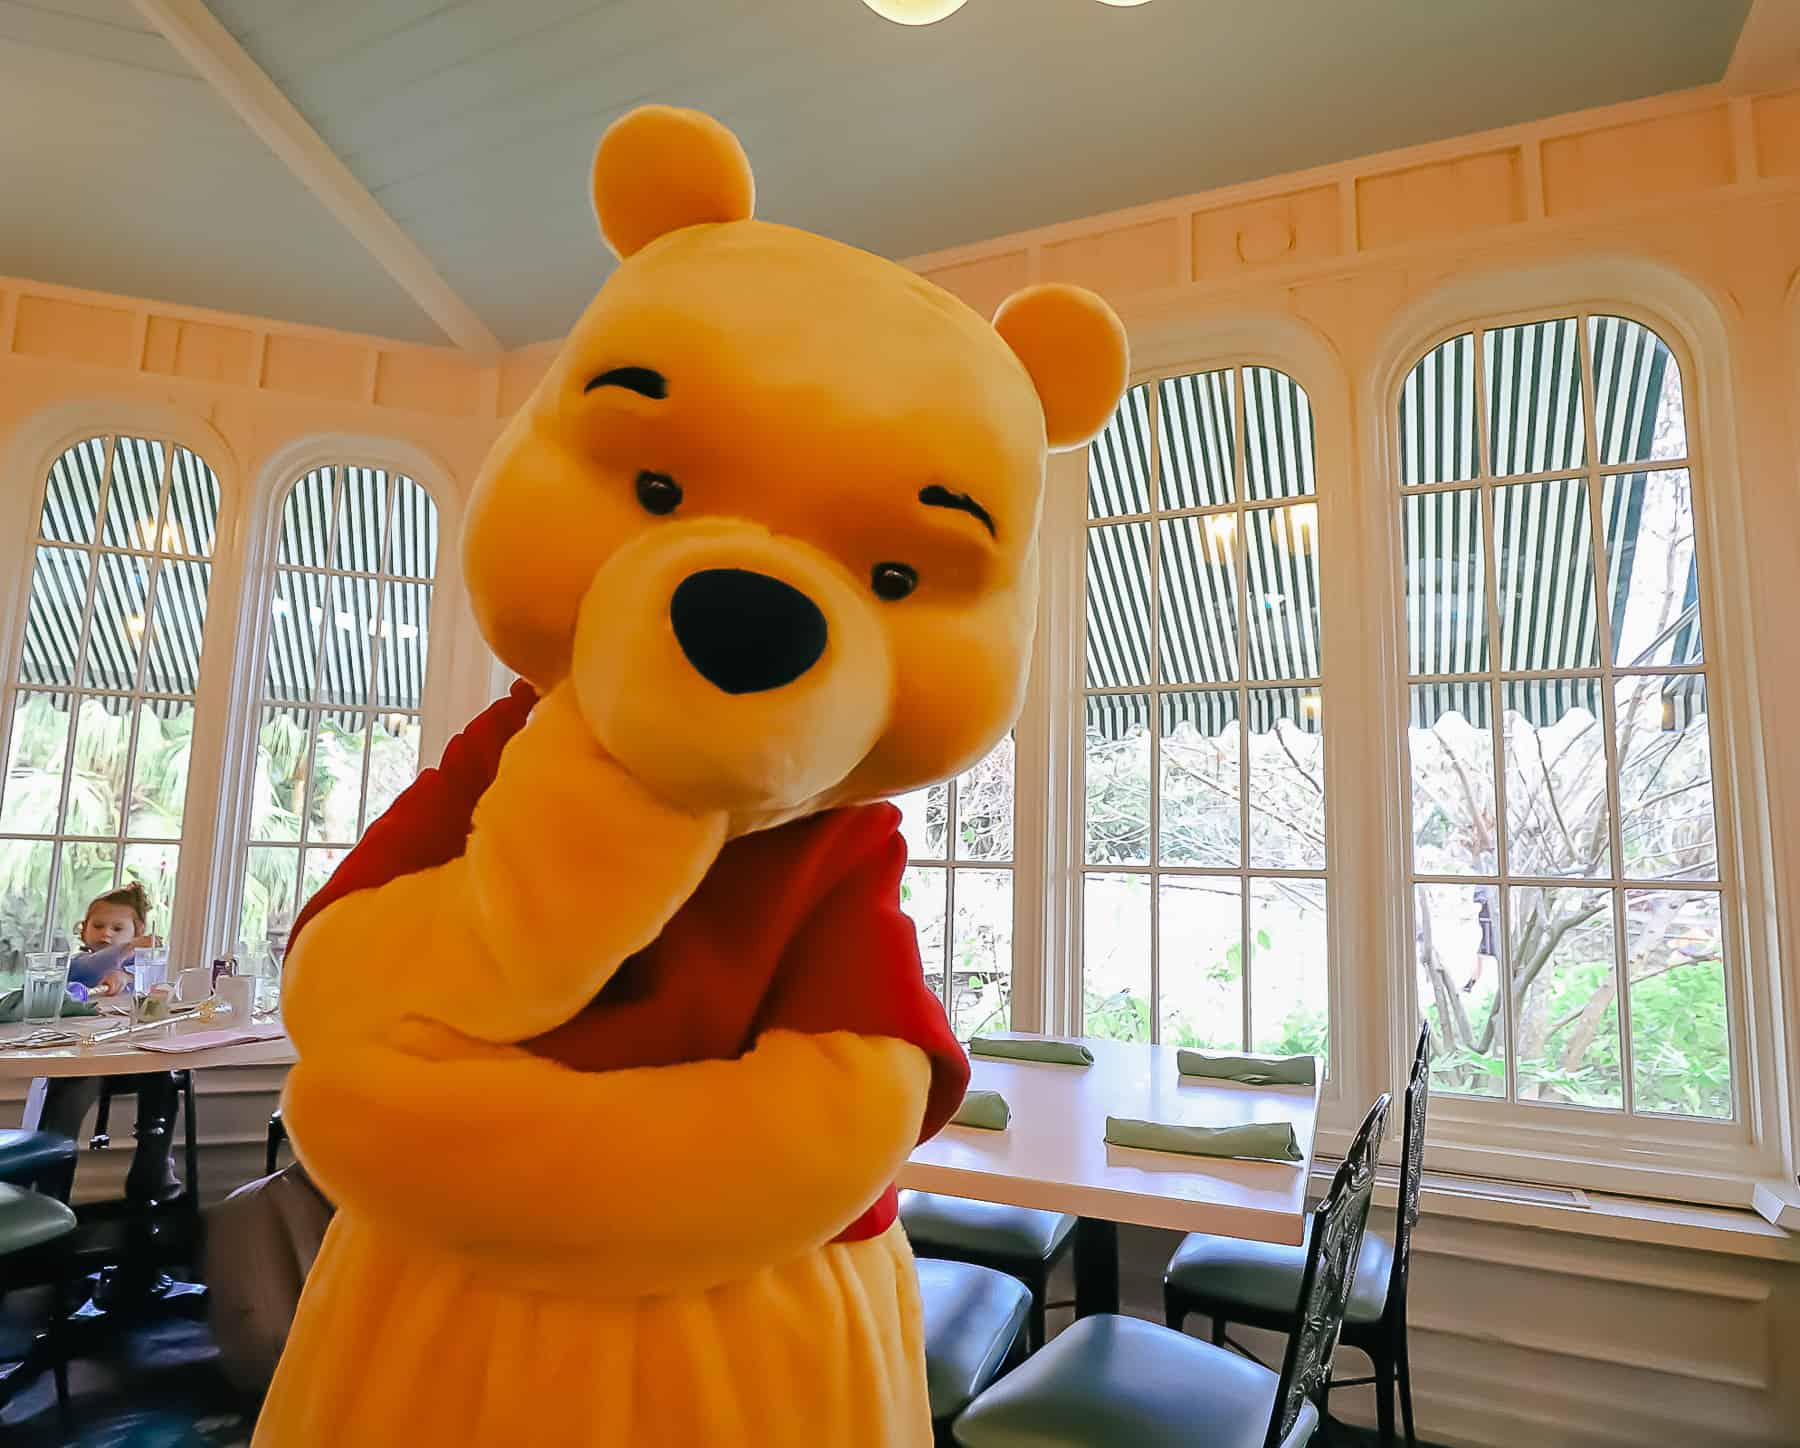 Winnie the Pooh characters at Disney World 